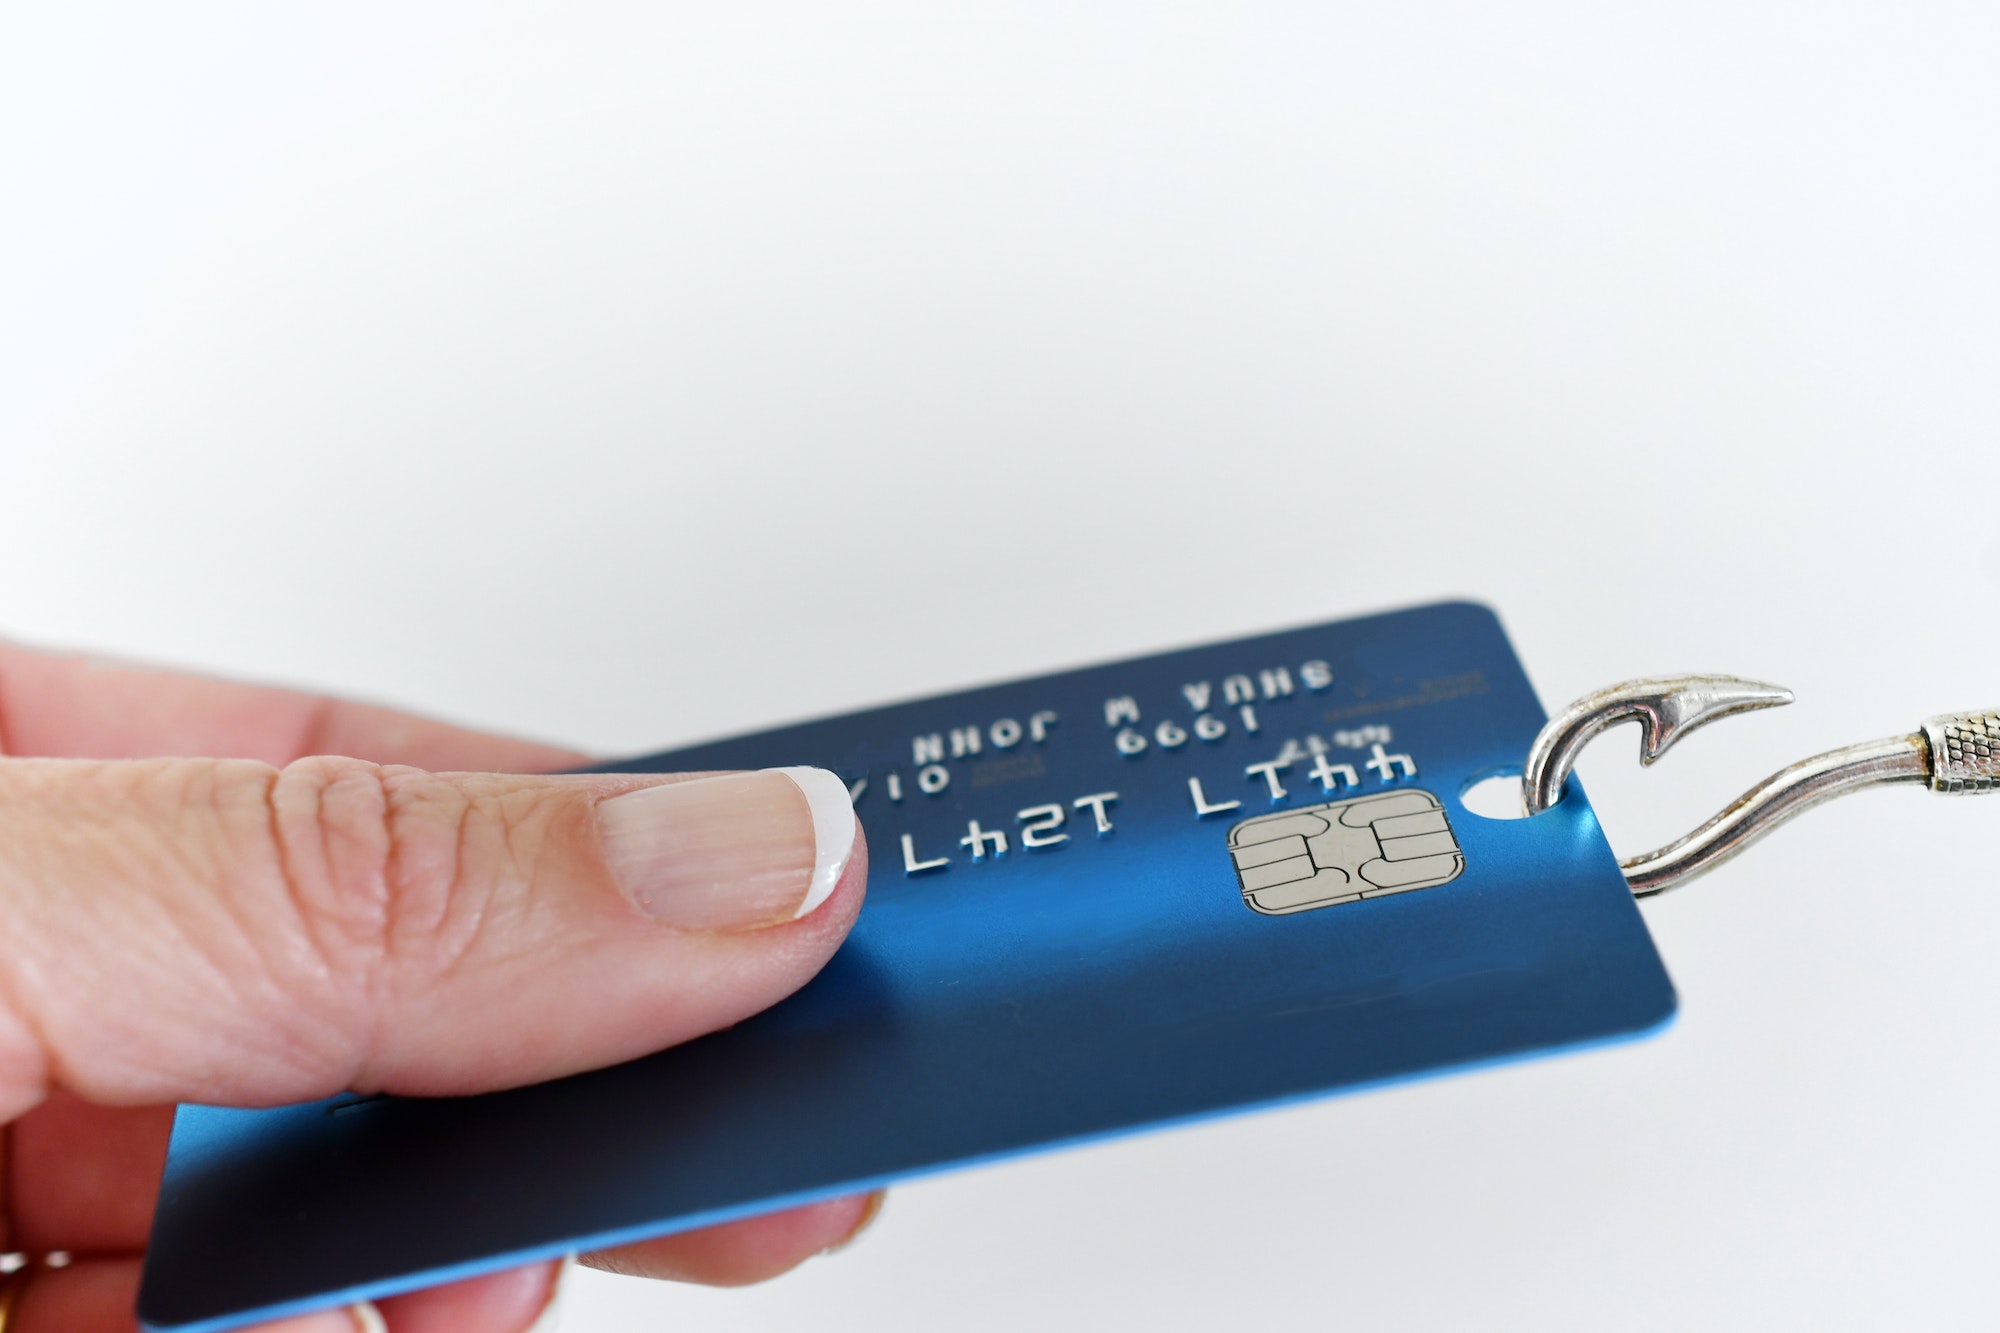 Phishing scam fraud identity theft concept - hand holding onto credit card on fishing hook